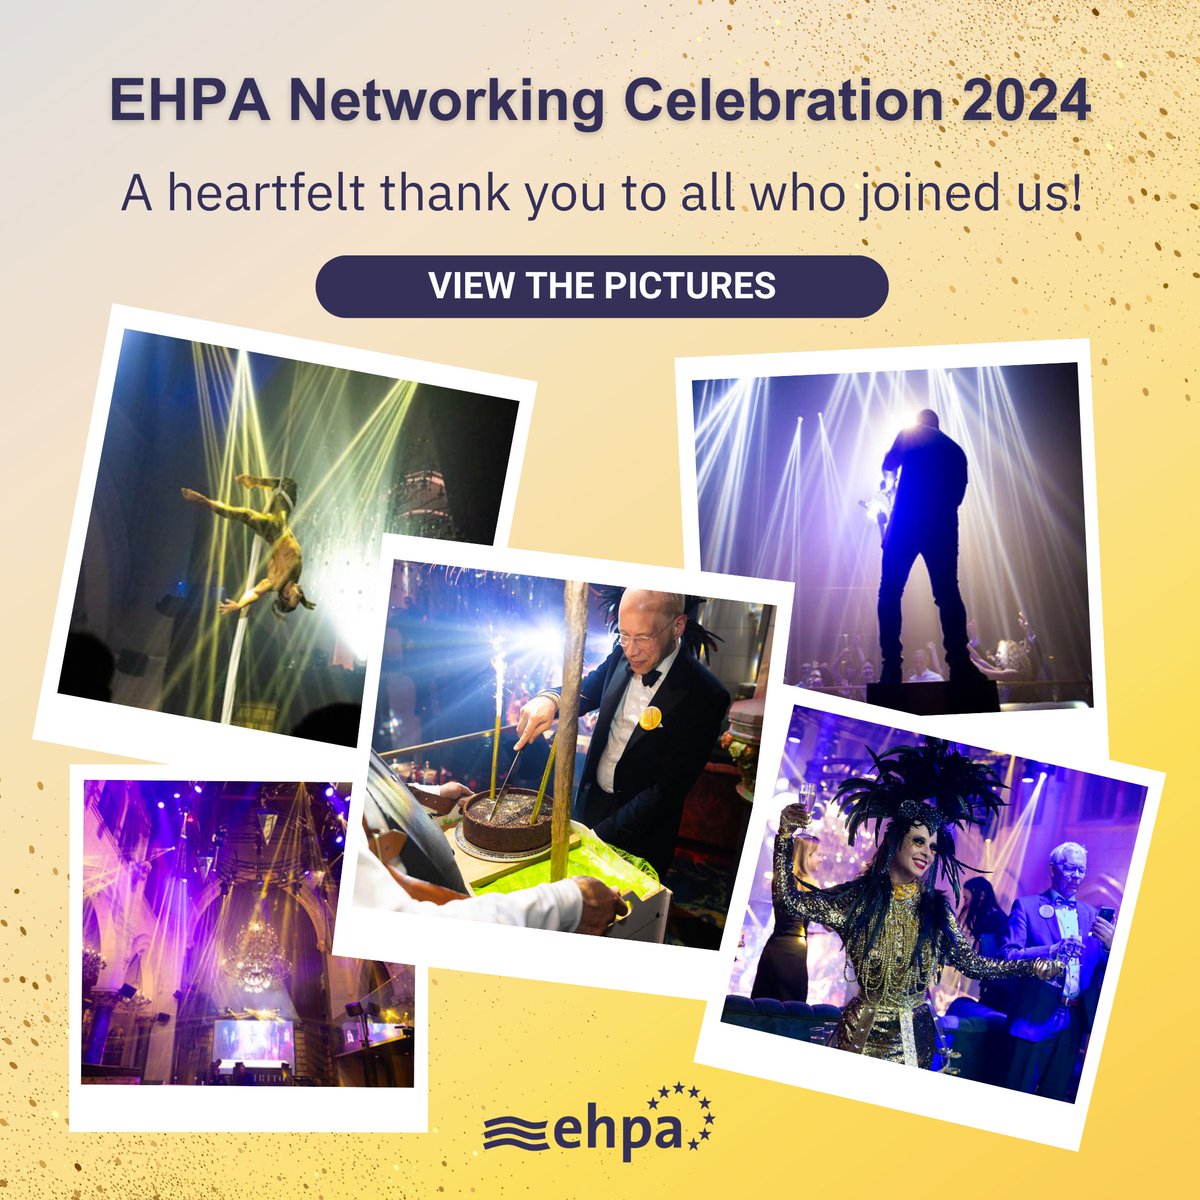 📸 Were you at the EHPA Networking Celebration on 16 April 2024 at Spirito Brussels? Browse our Flickr album 👉 flic.kr/s/aHBqjBogMg. Thanks to all who joined - your presence made the evening truly special! For those who missed it, catch a glimpse of the festivities! ⭐️